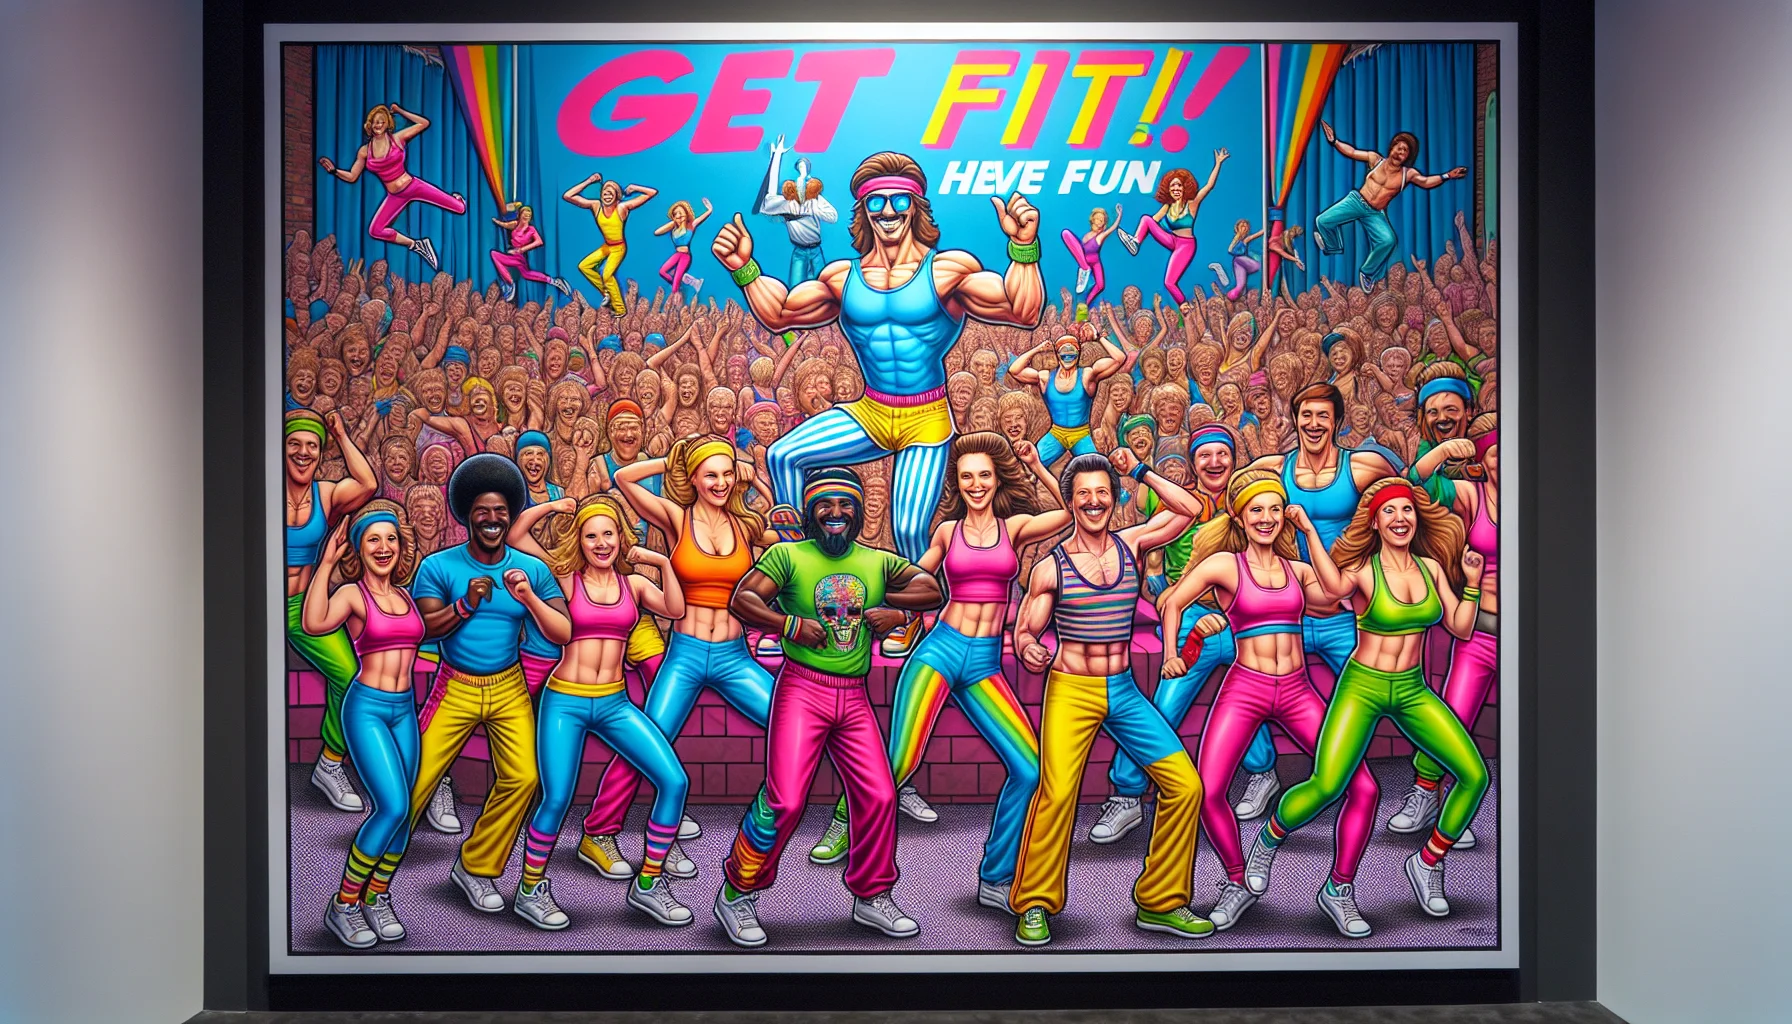 Imagine a humorous scene set in a lively gym, where a group of individuals of various descents and genders are happily participating in a zumba class. They are all wearing colorful 80s style zumba pants, which are highlighted by the expanse of colors, patterns, and exaggerated silhouettes. As an enticement for exercise, include a backdrop sign saying 'Get Fit, Have Fun!' with animated characters showing off dynamic zumba moves. The whole setting should evoke a sense of fun and motivation to join in the activity.